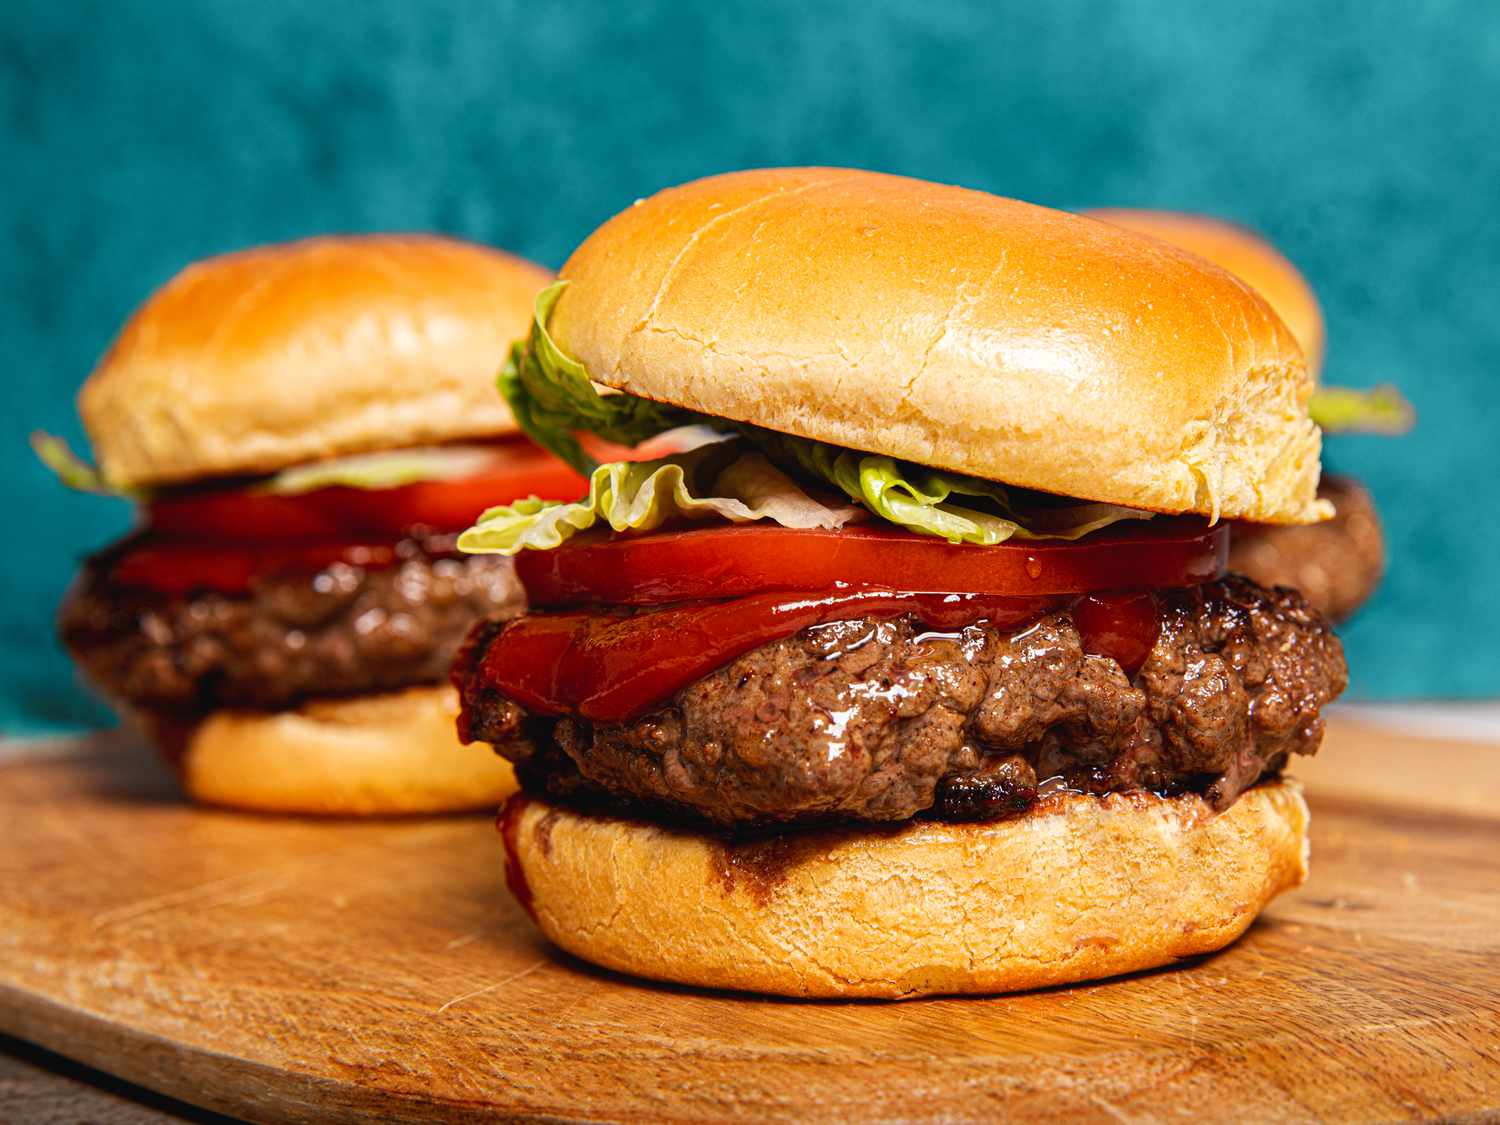 Wagyu burgers on a bun with ketchup, tomato and lettuce.